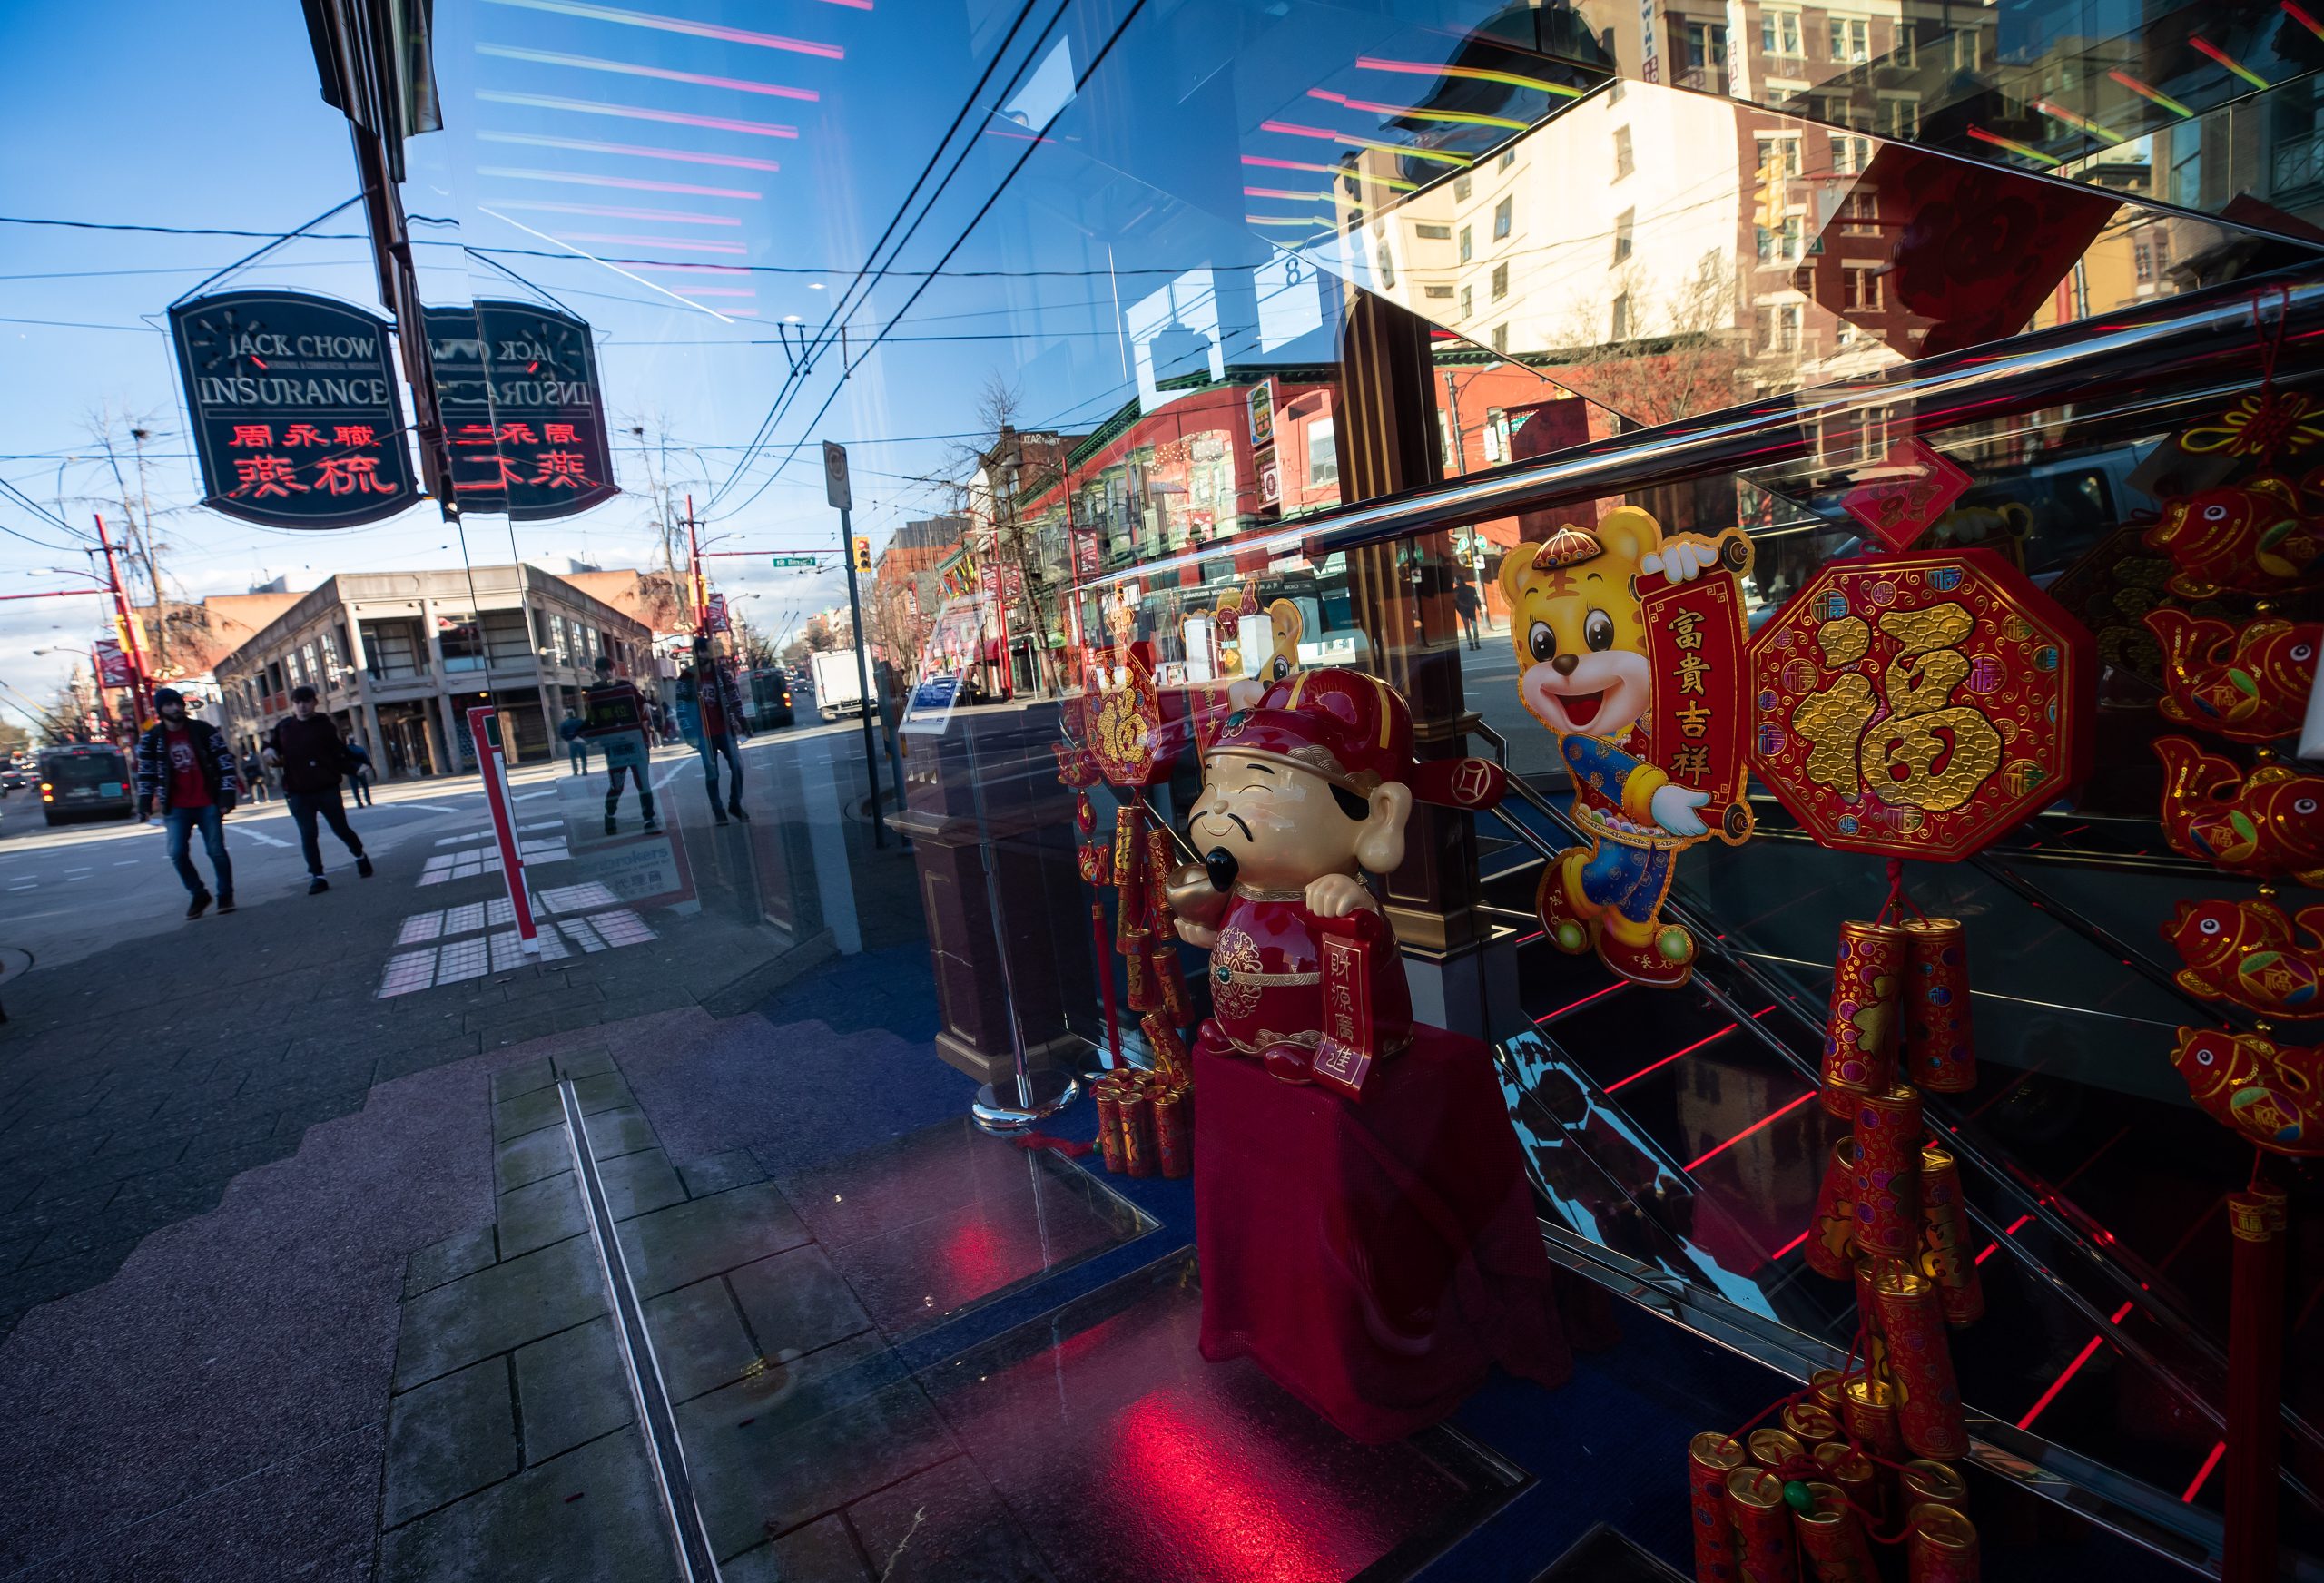 People walk past a Chinese New Year window display in the Jack Chow Insurance building in Chinatown, in Vancouver, on Tuesday, February 1, 2022. The designated heritage site measures only four feet 10 inches (1.47 metres) wide and holds the title of “World's Narrowest Commercial Building” in the Guinness Book of Records. Tuesday marks the beginning of the Lunar New Year, ushering in the year of the tiger in the Chinese zodiac